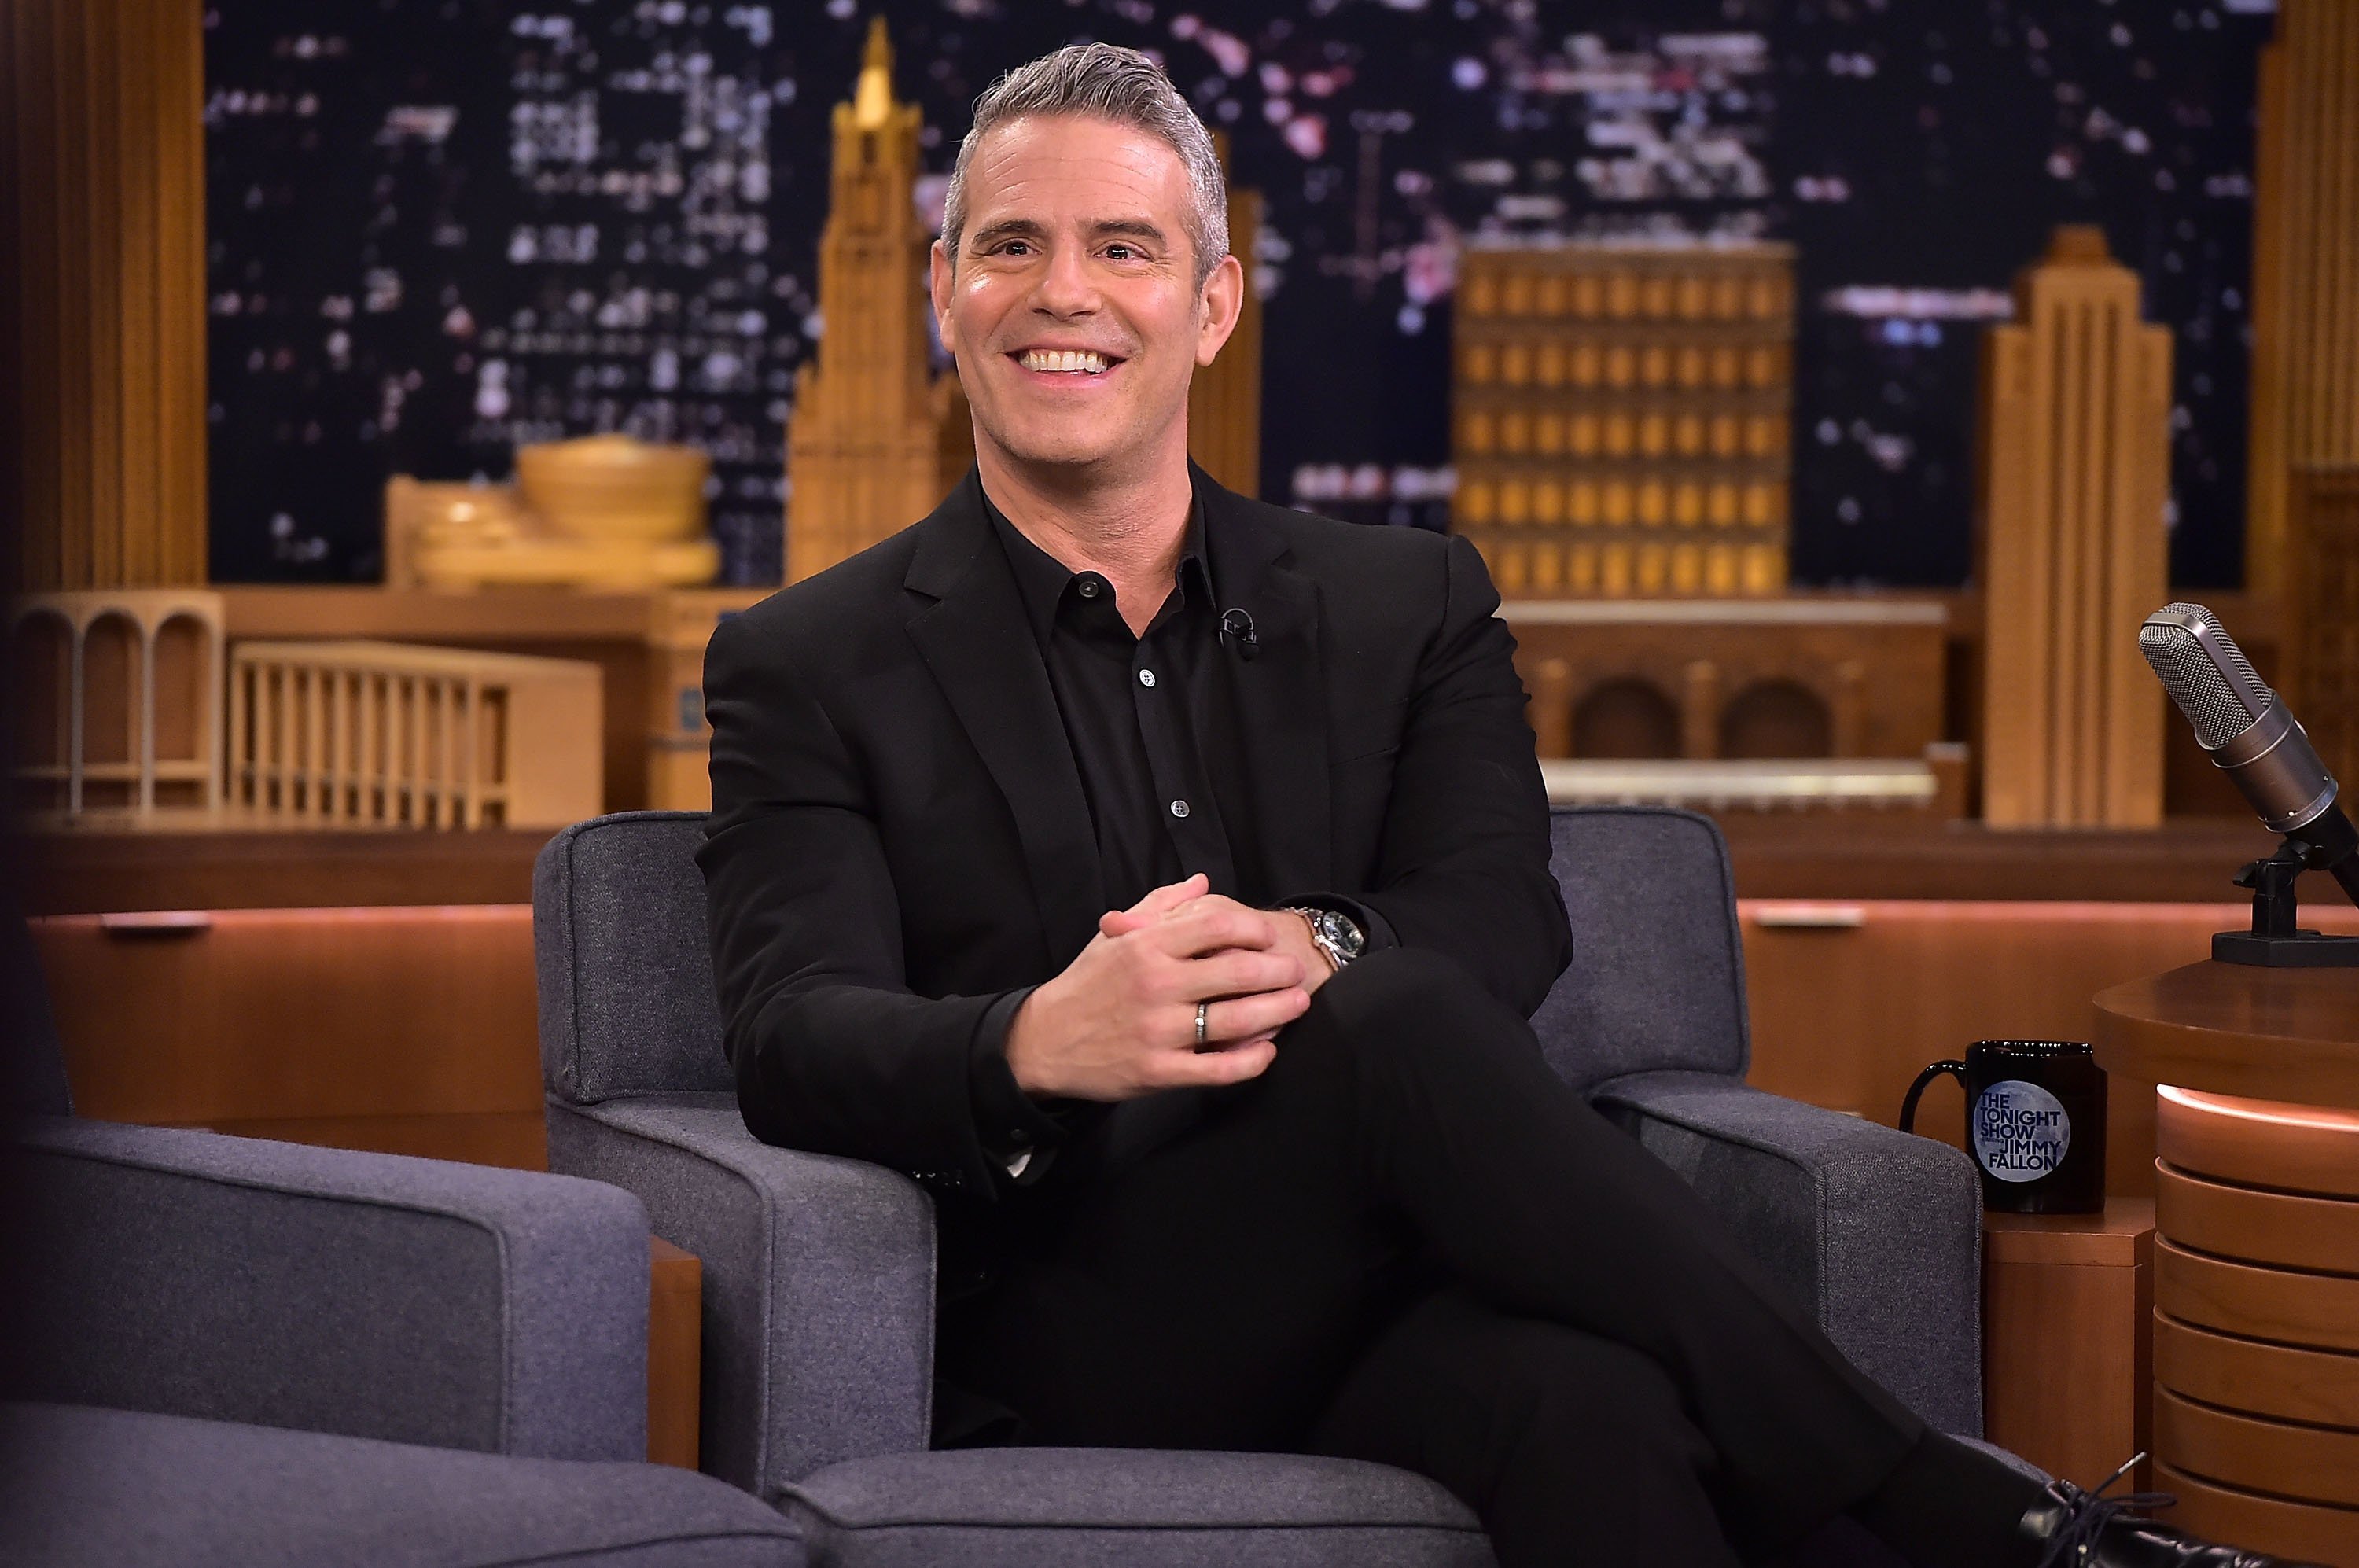 Andy Cohen visits "The Tonight Show Starring Jimmy Fallon" on December 5, 2018 | Photo: GettyImages